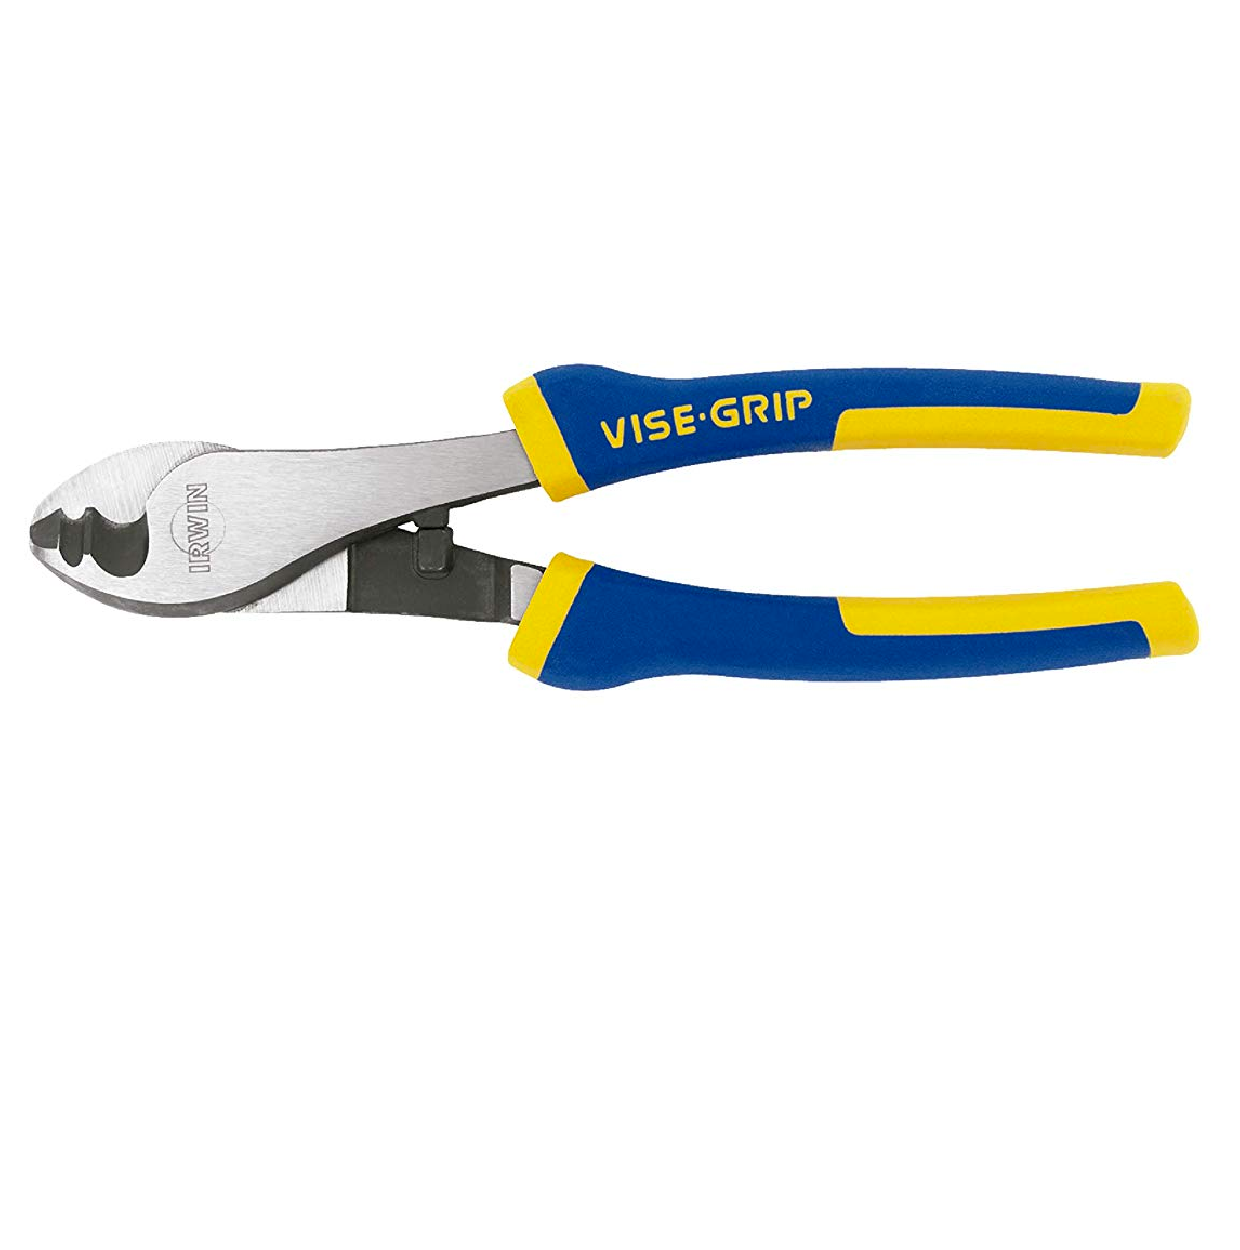 IRWIN 10505518 - Cable Cutting Plier 8-inch